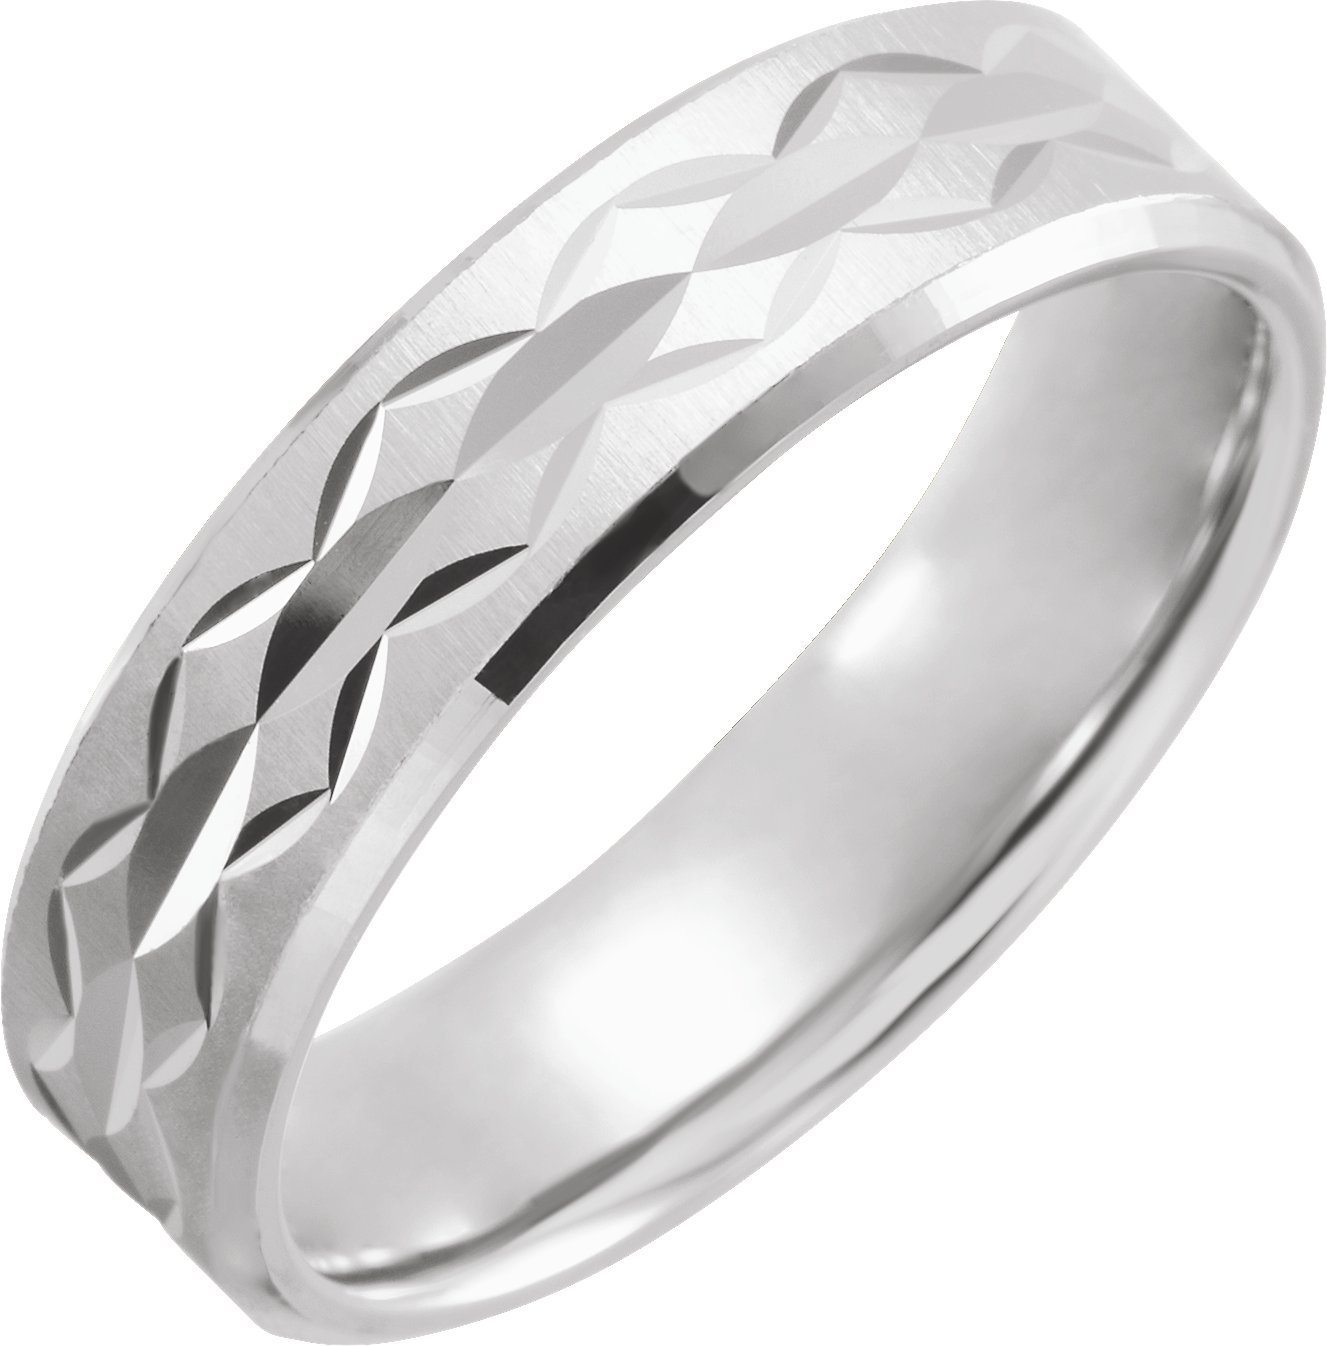 Continuum Sterling Silver 6 mm Design Band with Satin Polished Finish Size 17 Ref 16486087